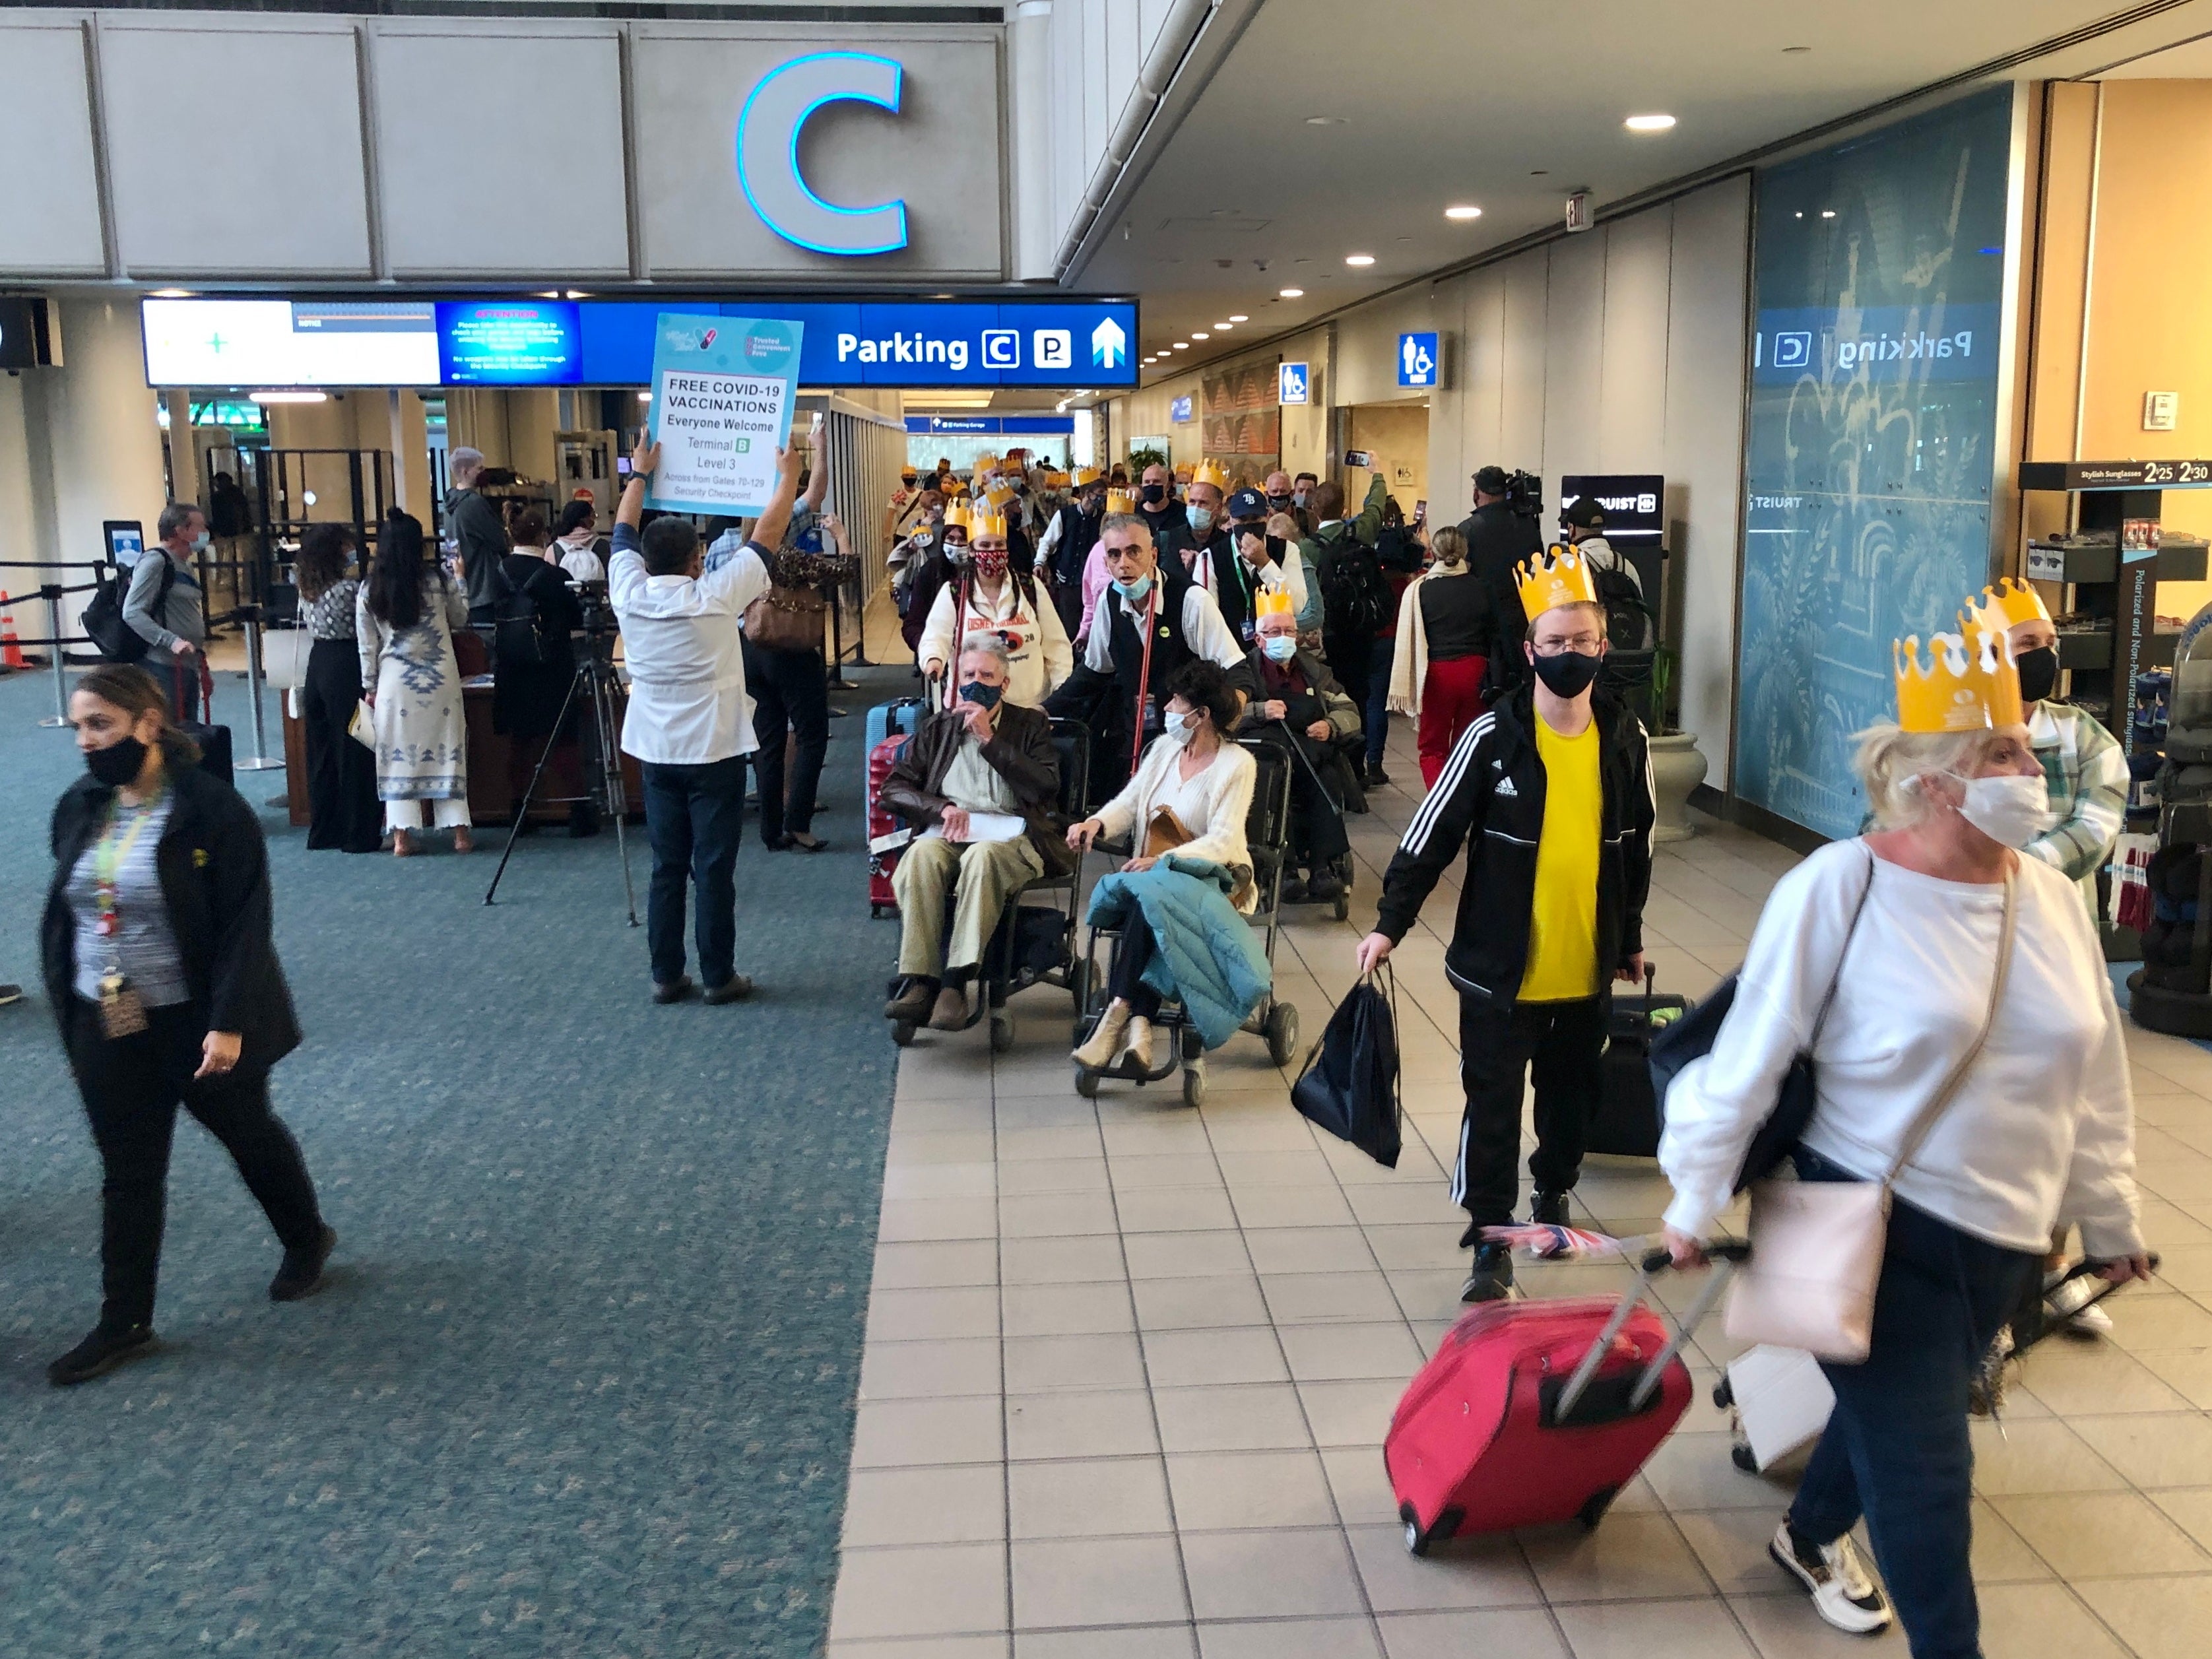 Back in the USA: Passengers at Orlando airport in Florida arriving on the first flight from the UK – Virgin Atlantic from Manchester